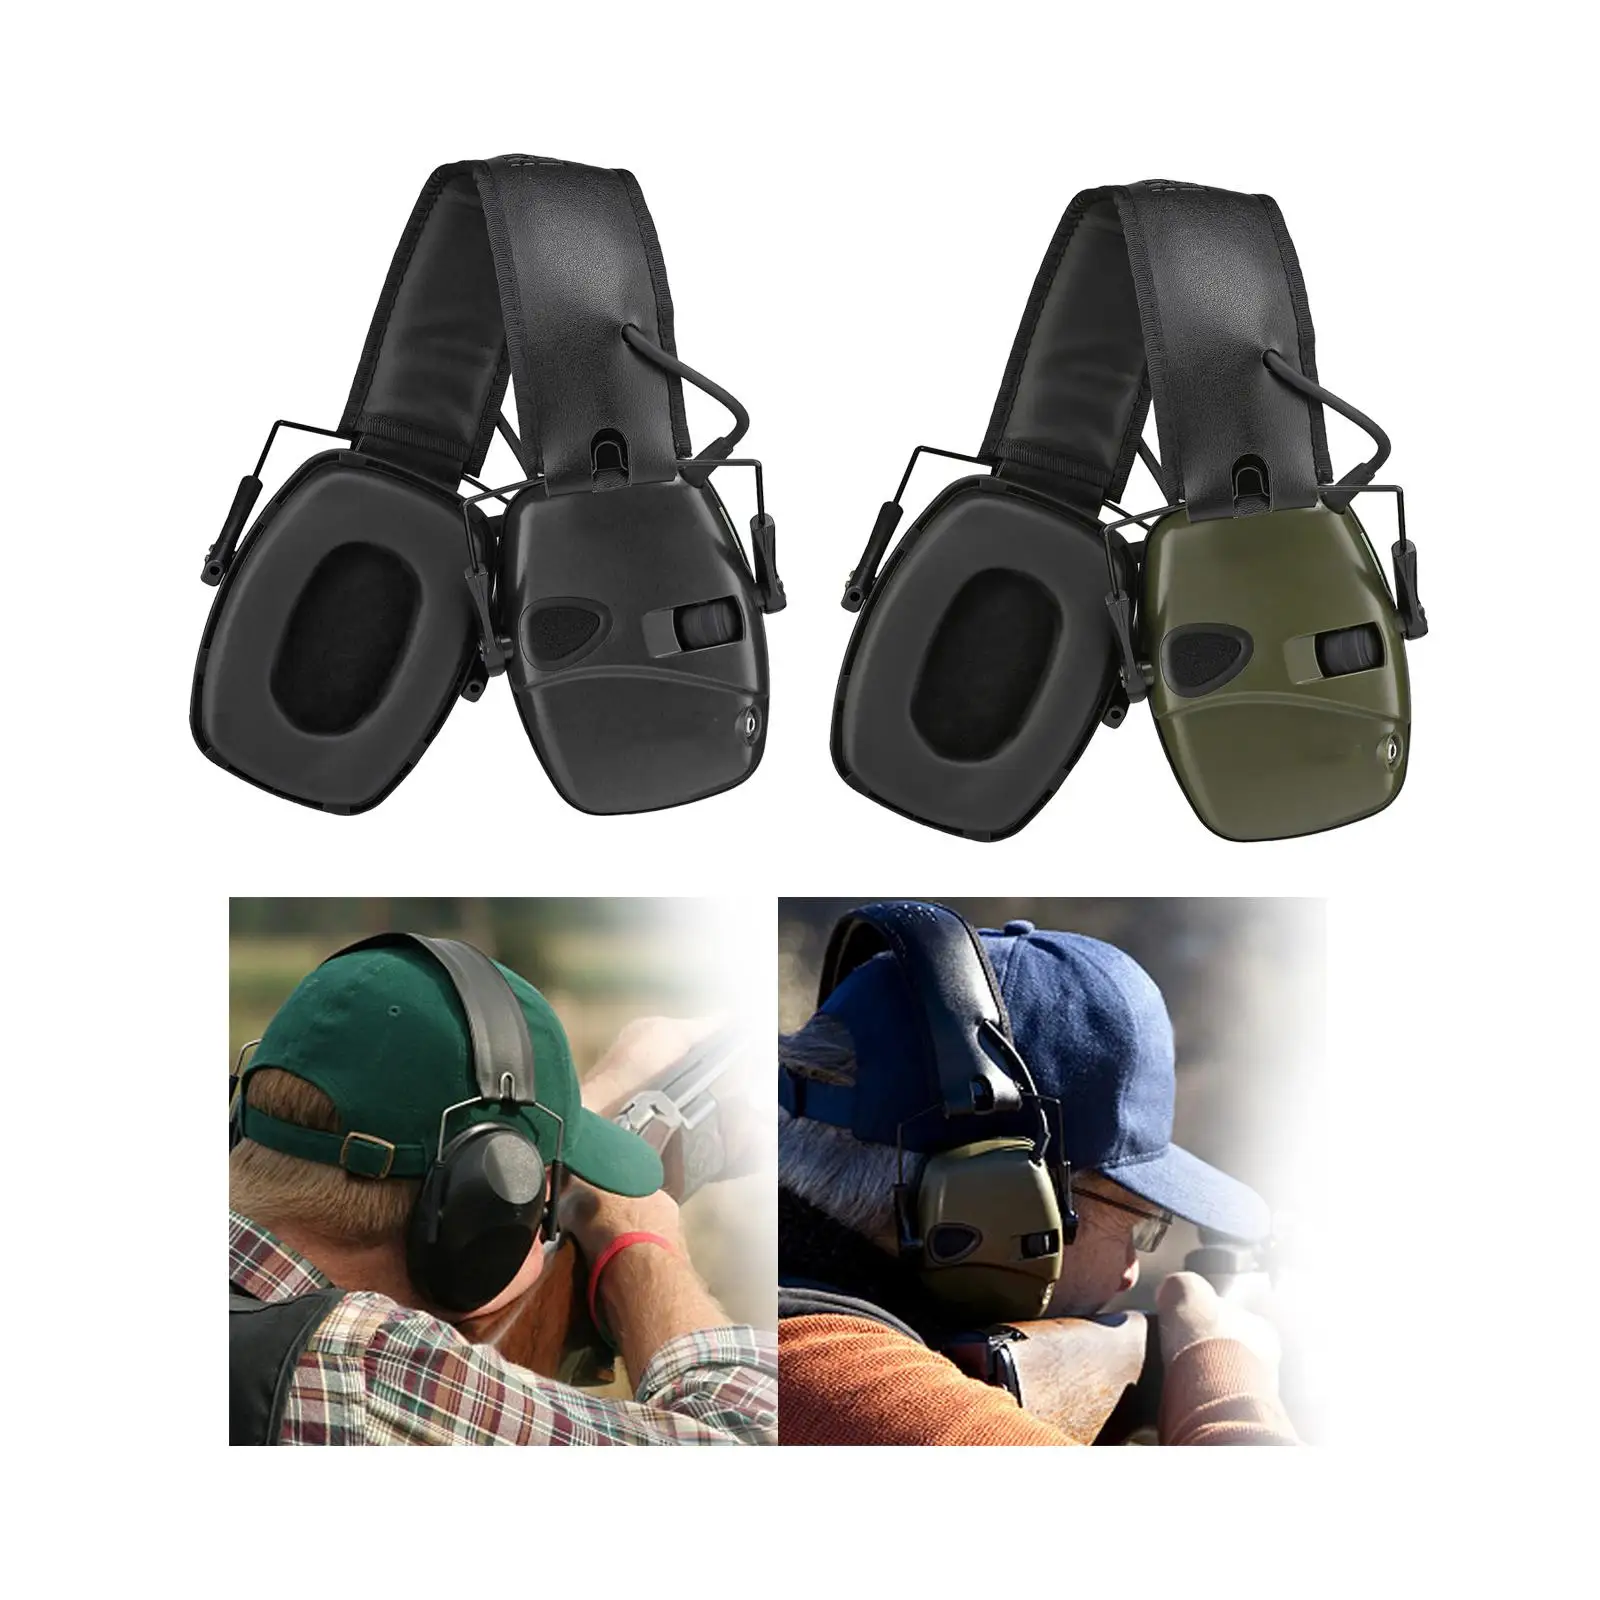 Hearing Protection Earmuff Folding Ear Protection Hearing Amplifiers Ear Plugs Protective Headset for Gameing Mowing Shooting